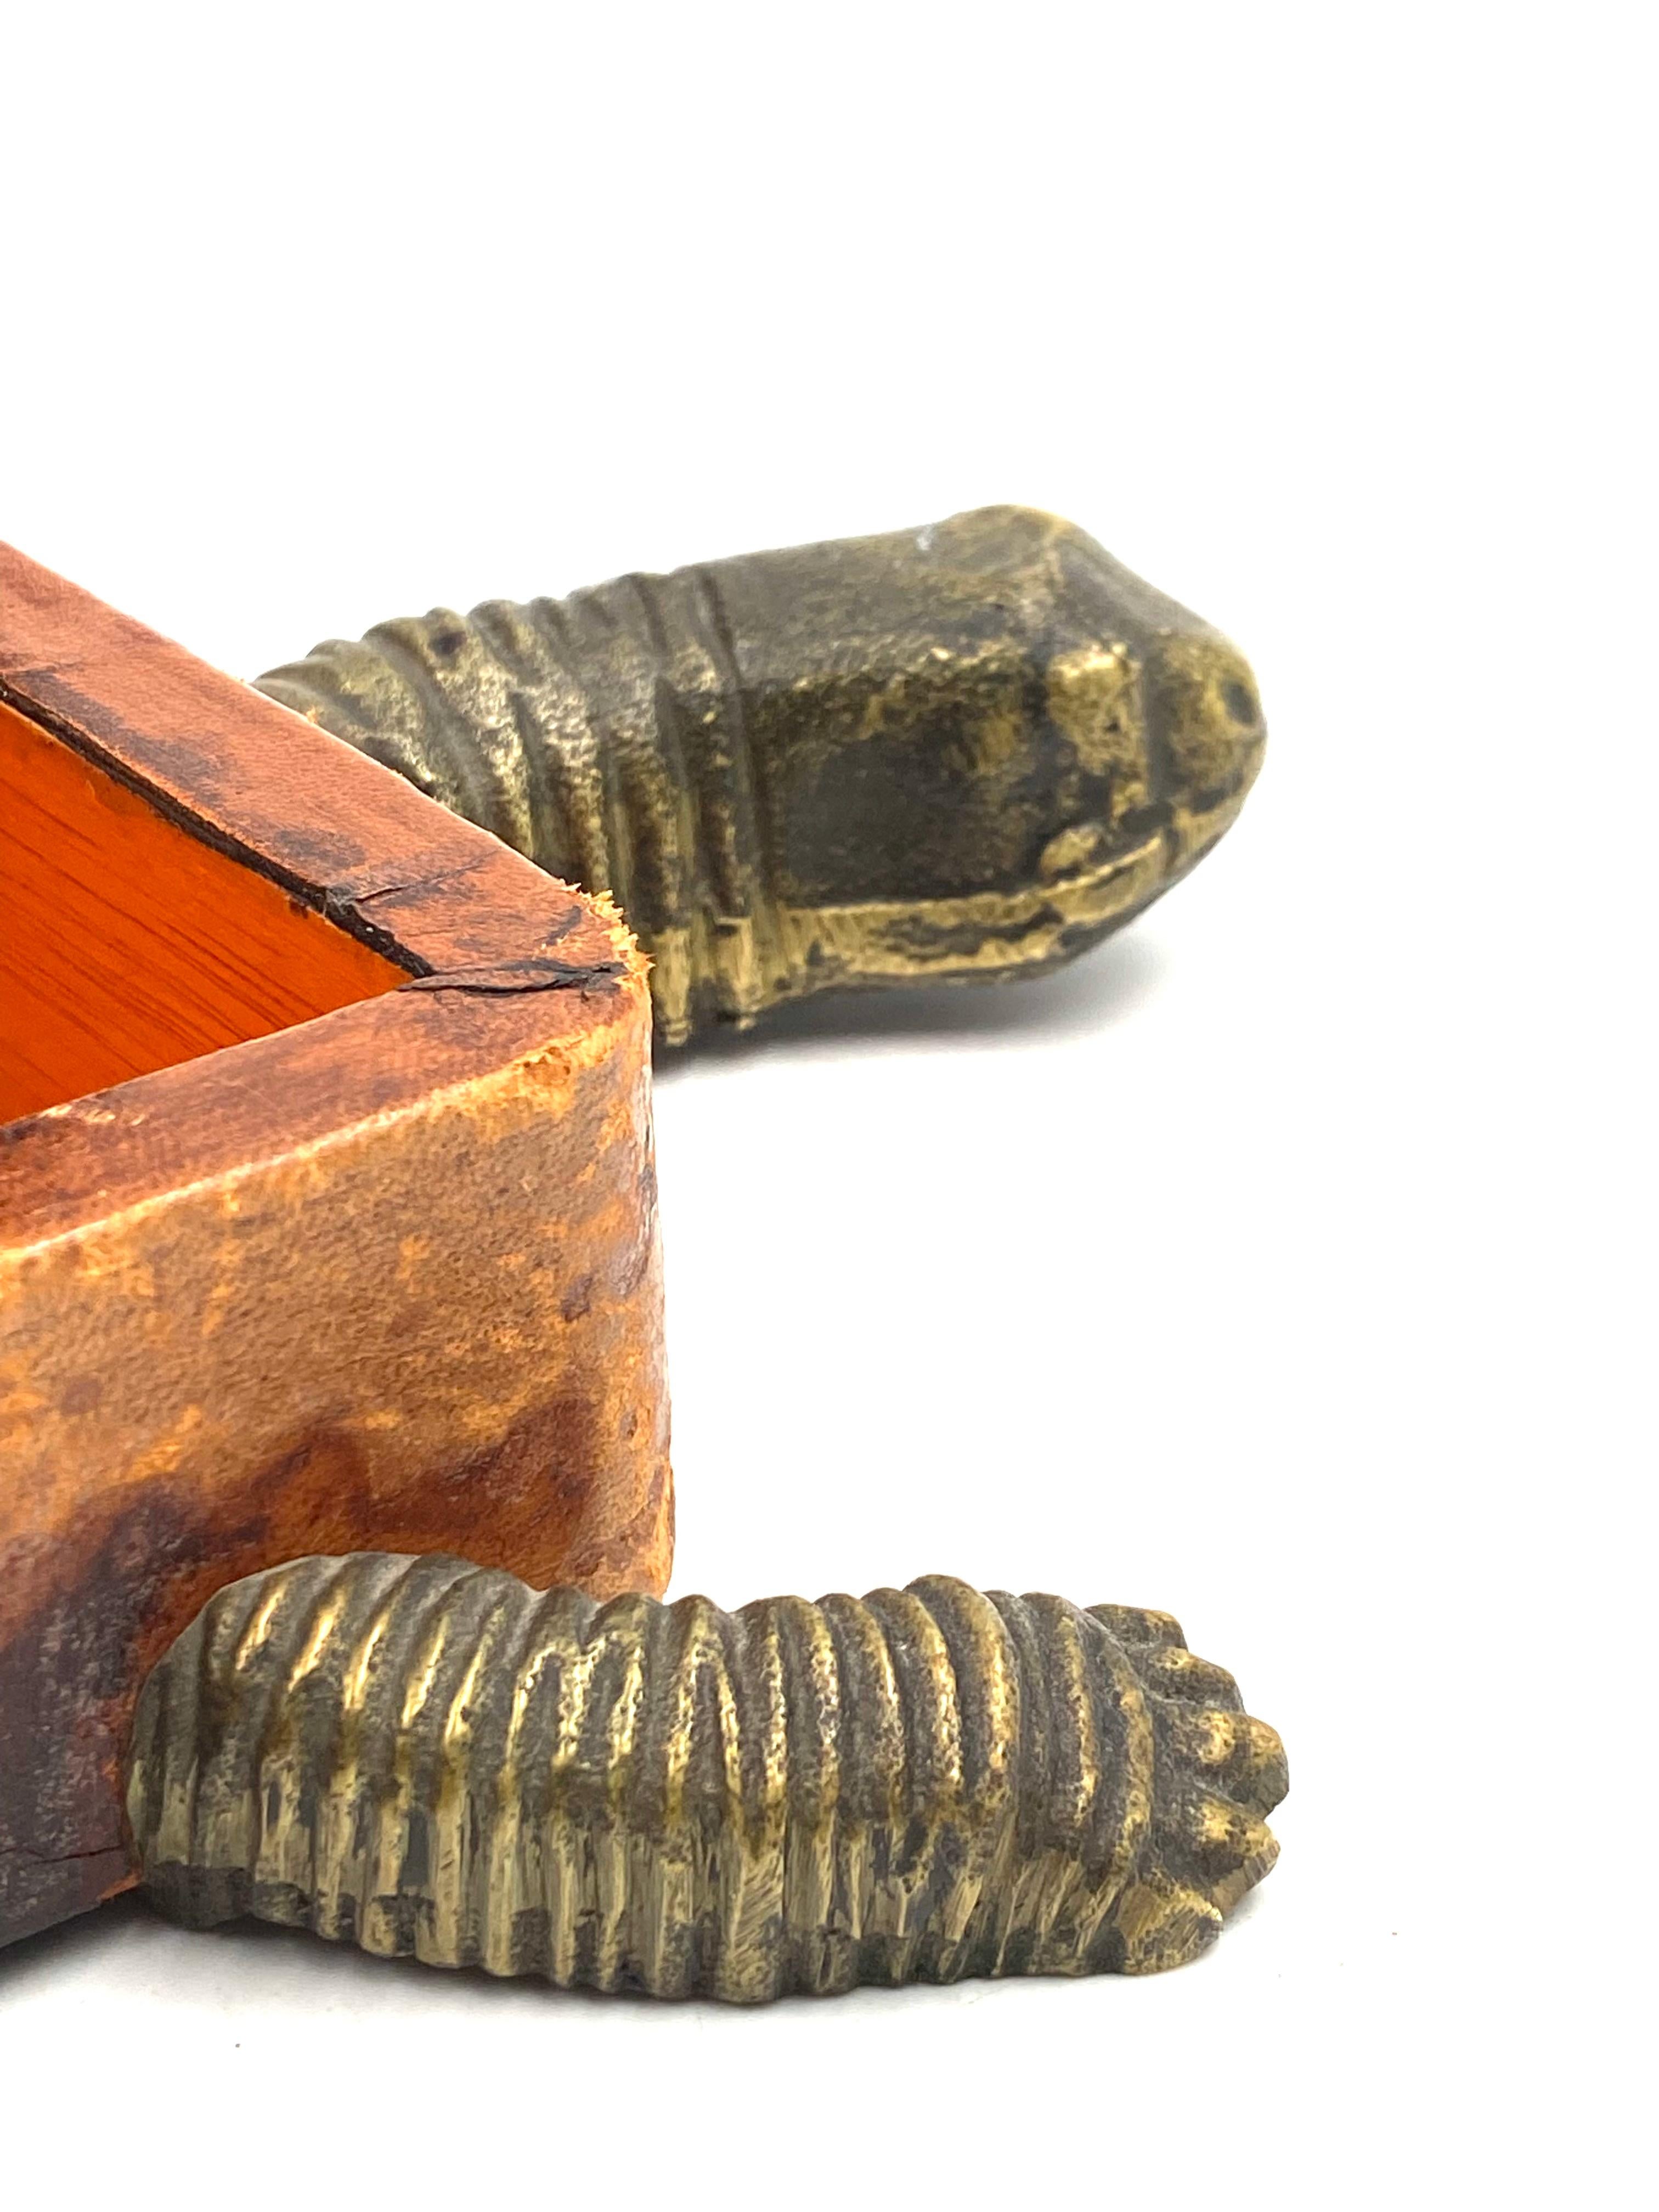 Turtle Shaped Leather and Bronze Jewelry Box, France 1950s For Sale 13